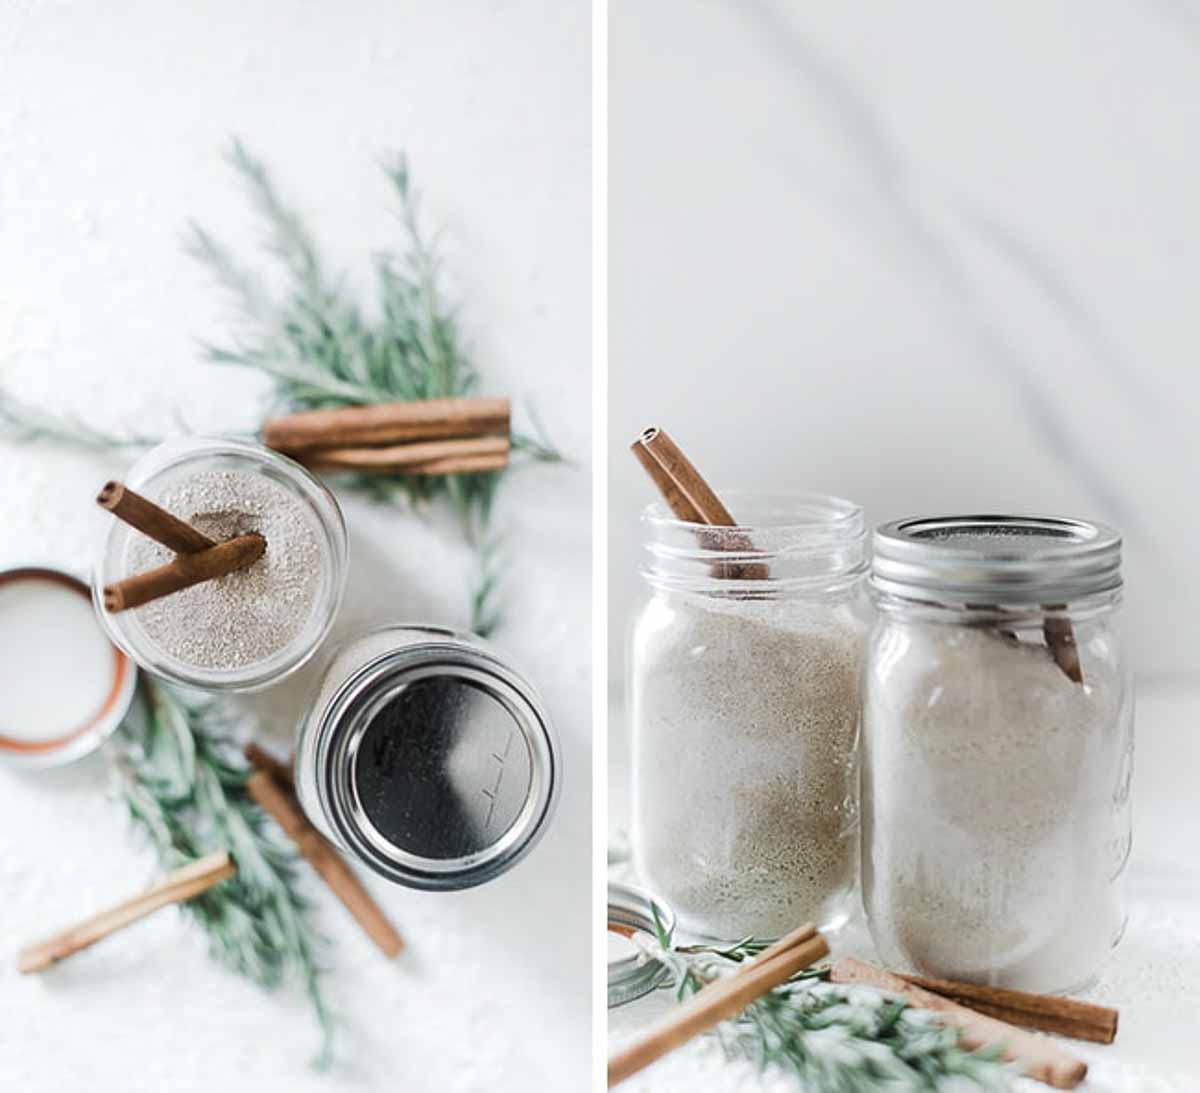 Hot milk powder mix in mason jars to give as gifts.